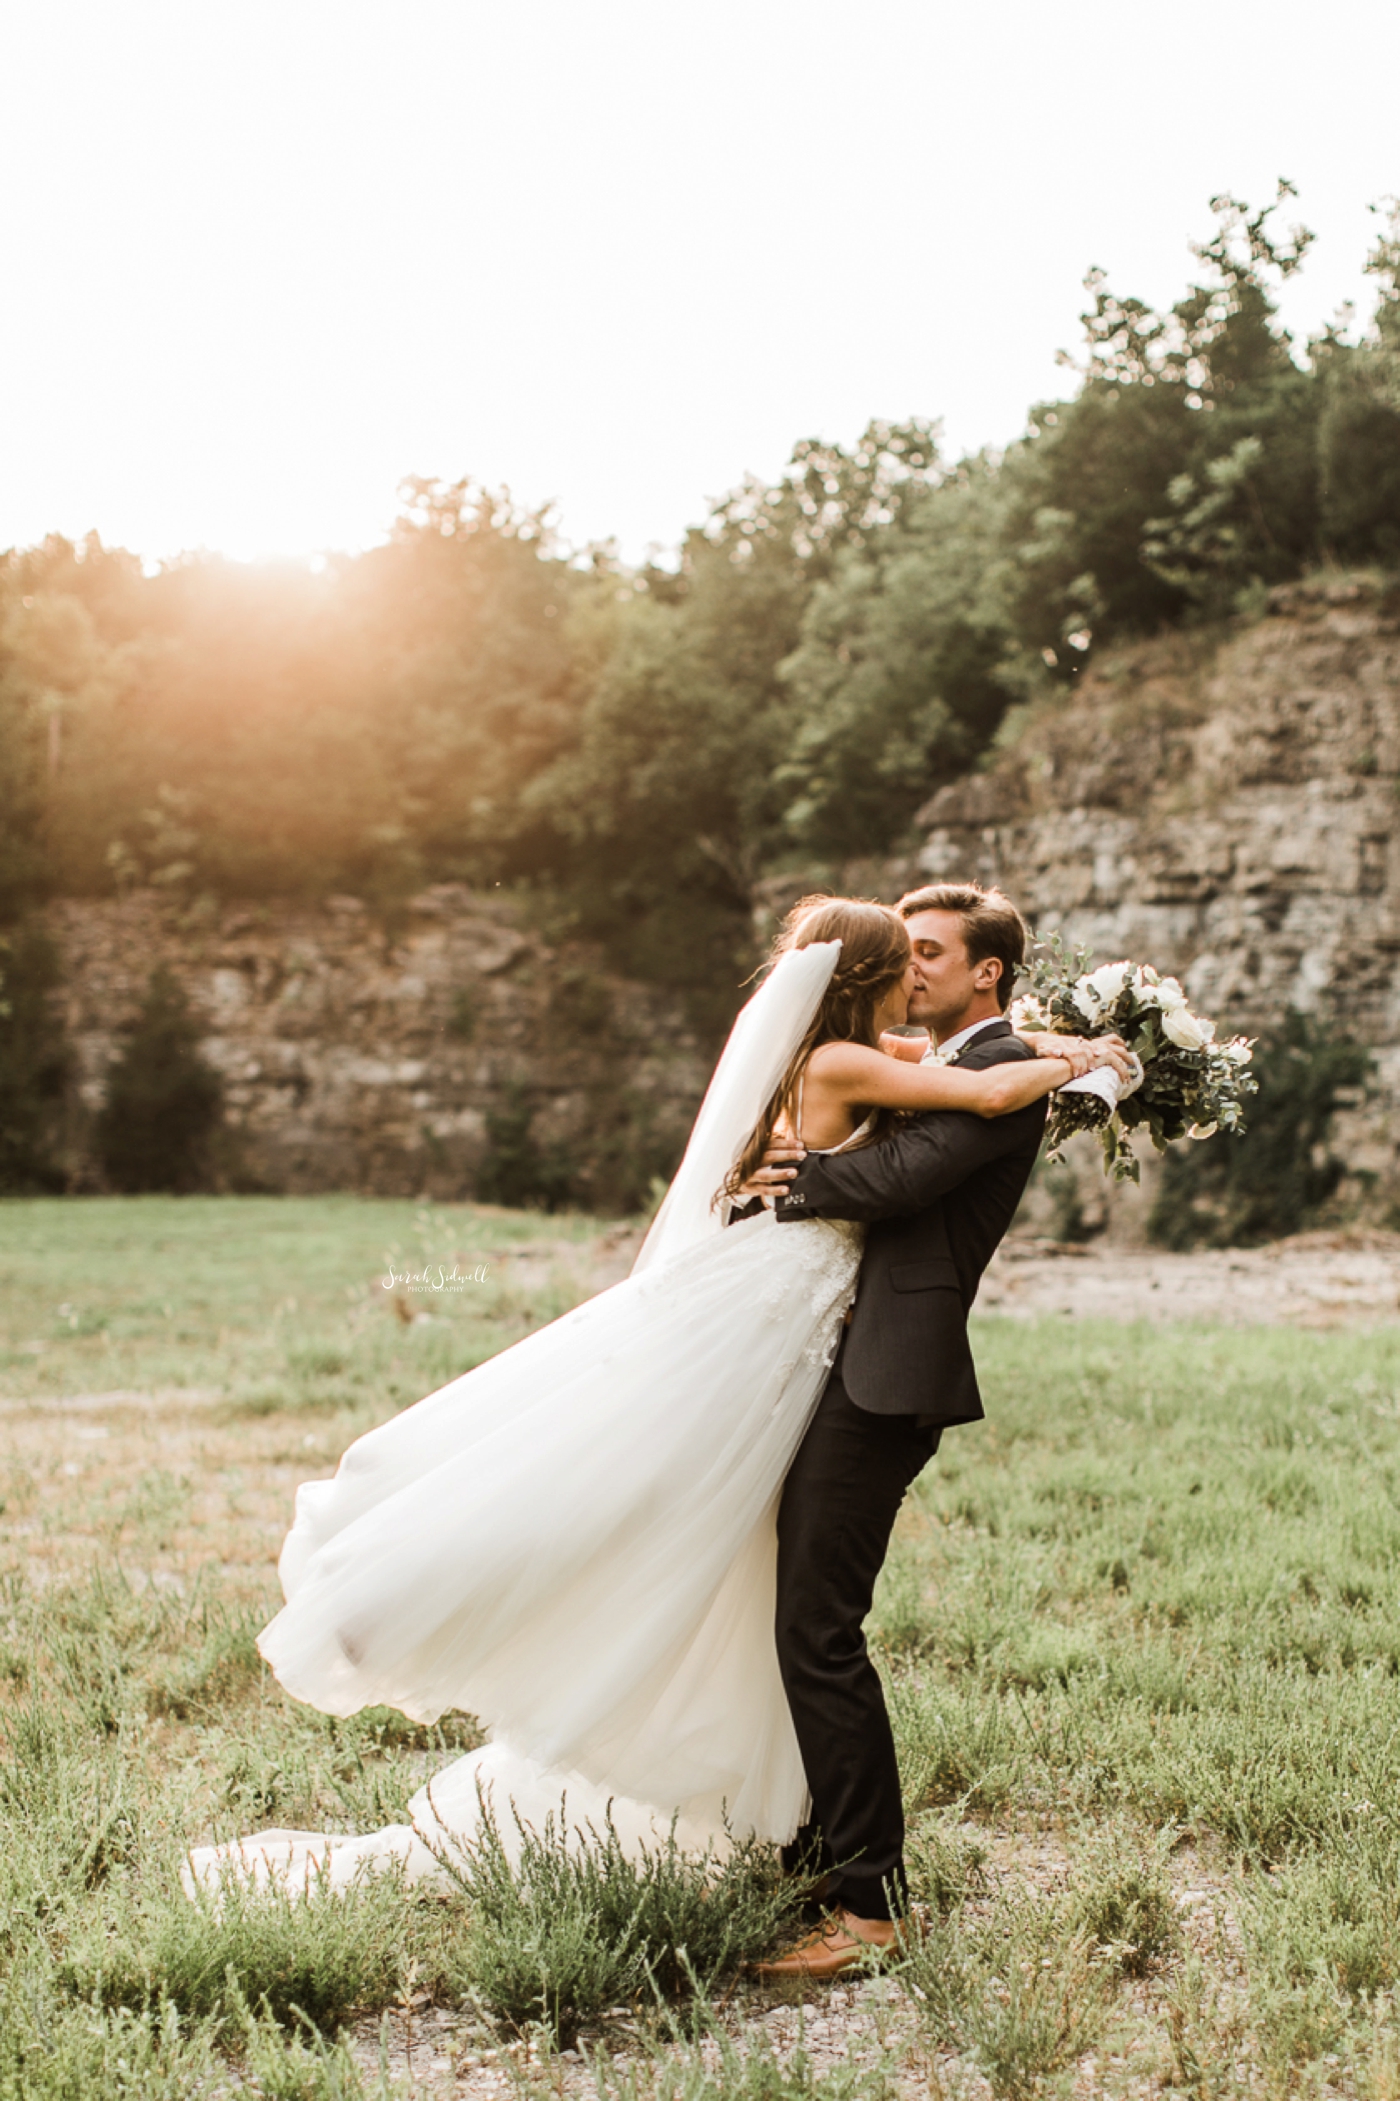 A bride jumps into the arms of her groom. 